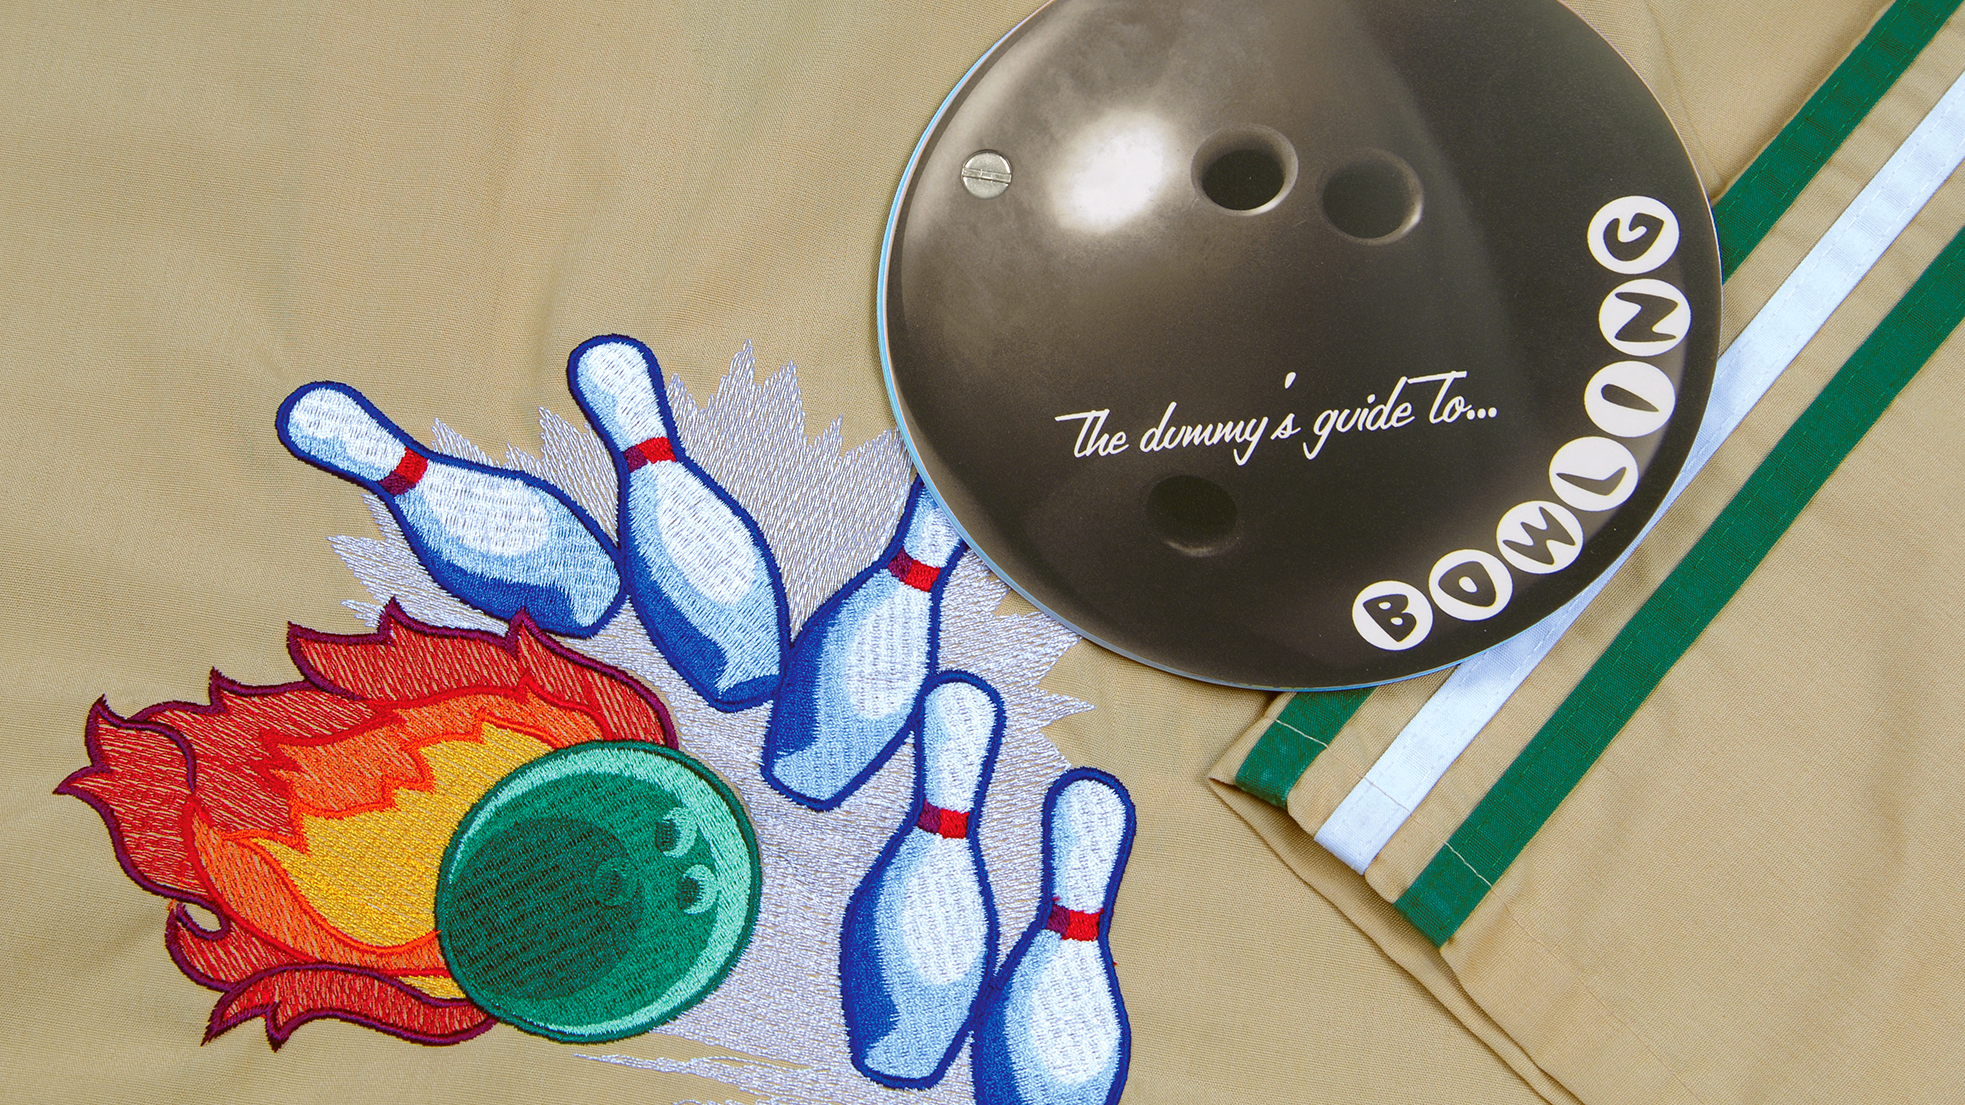 The Dummy's Guide to Bowling